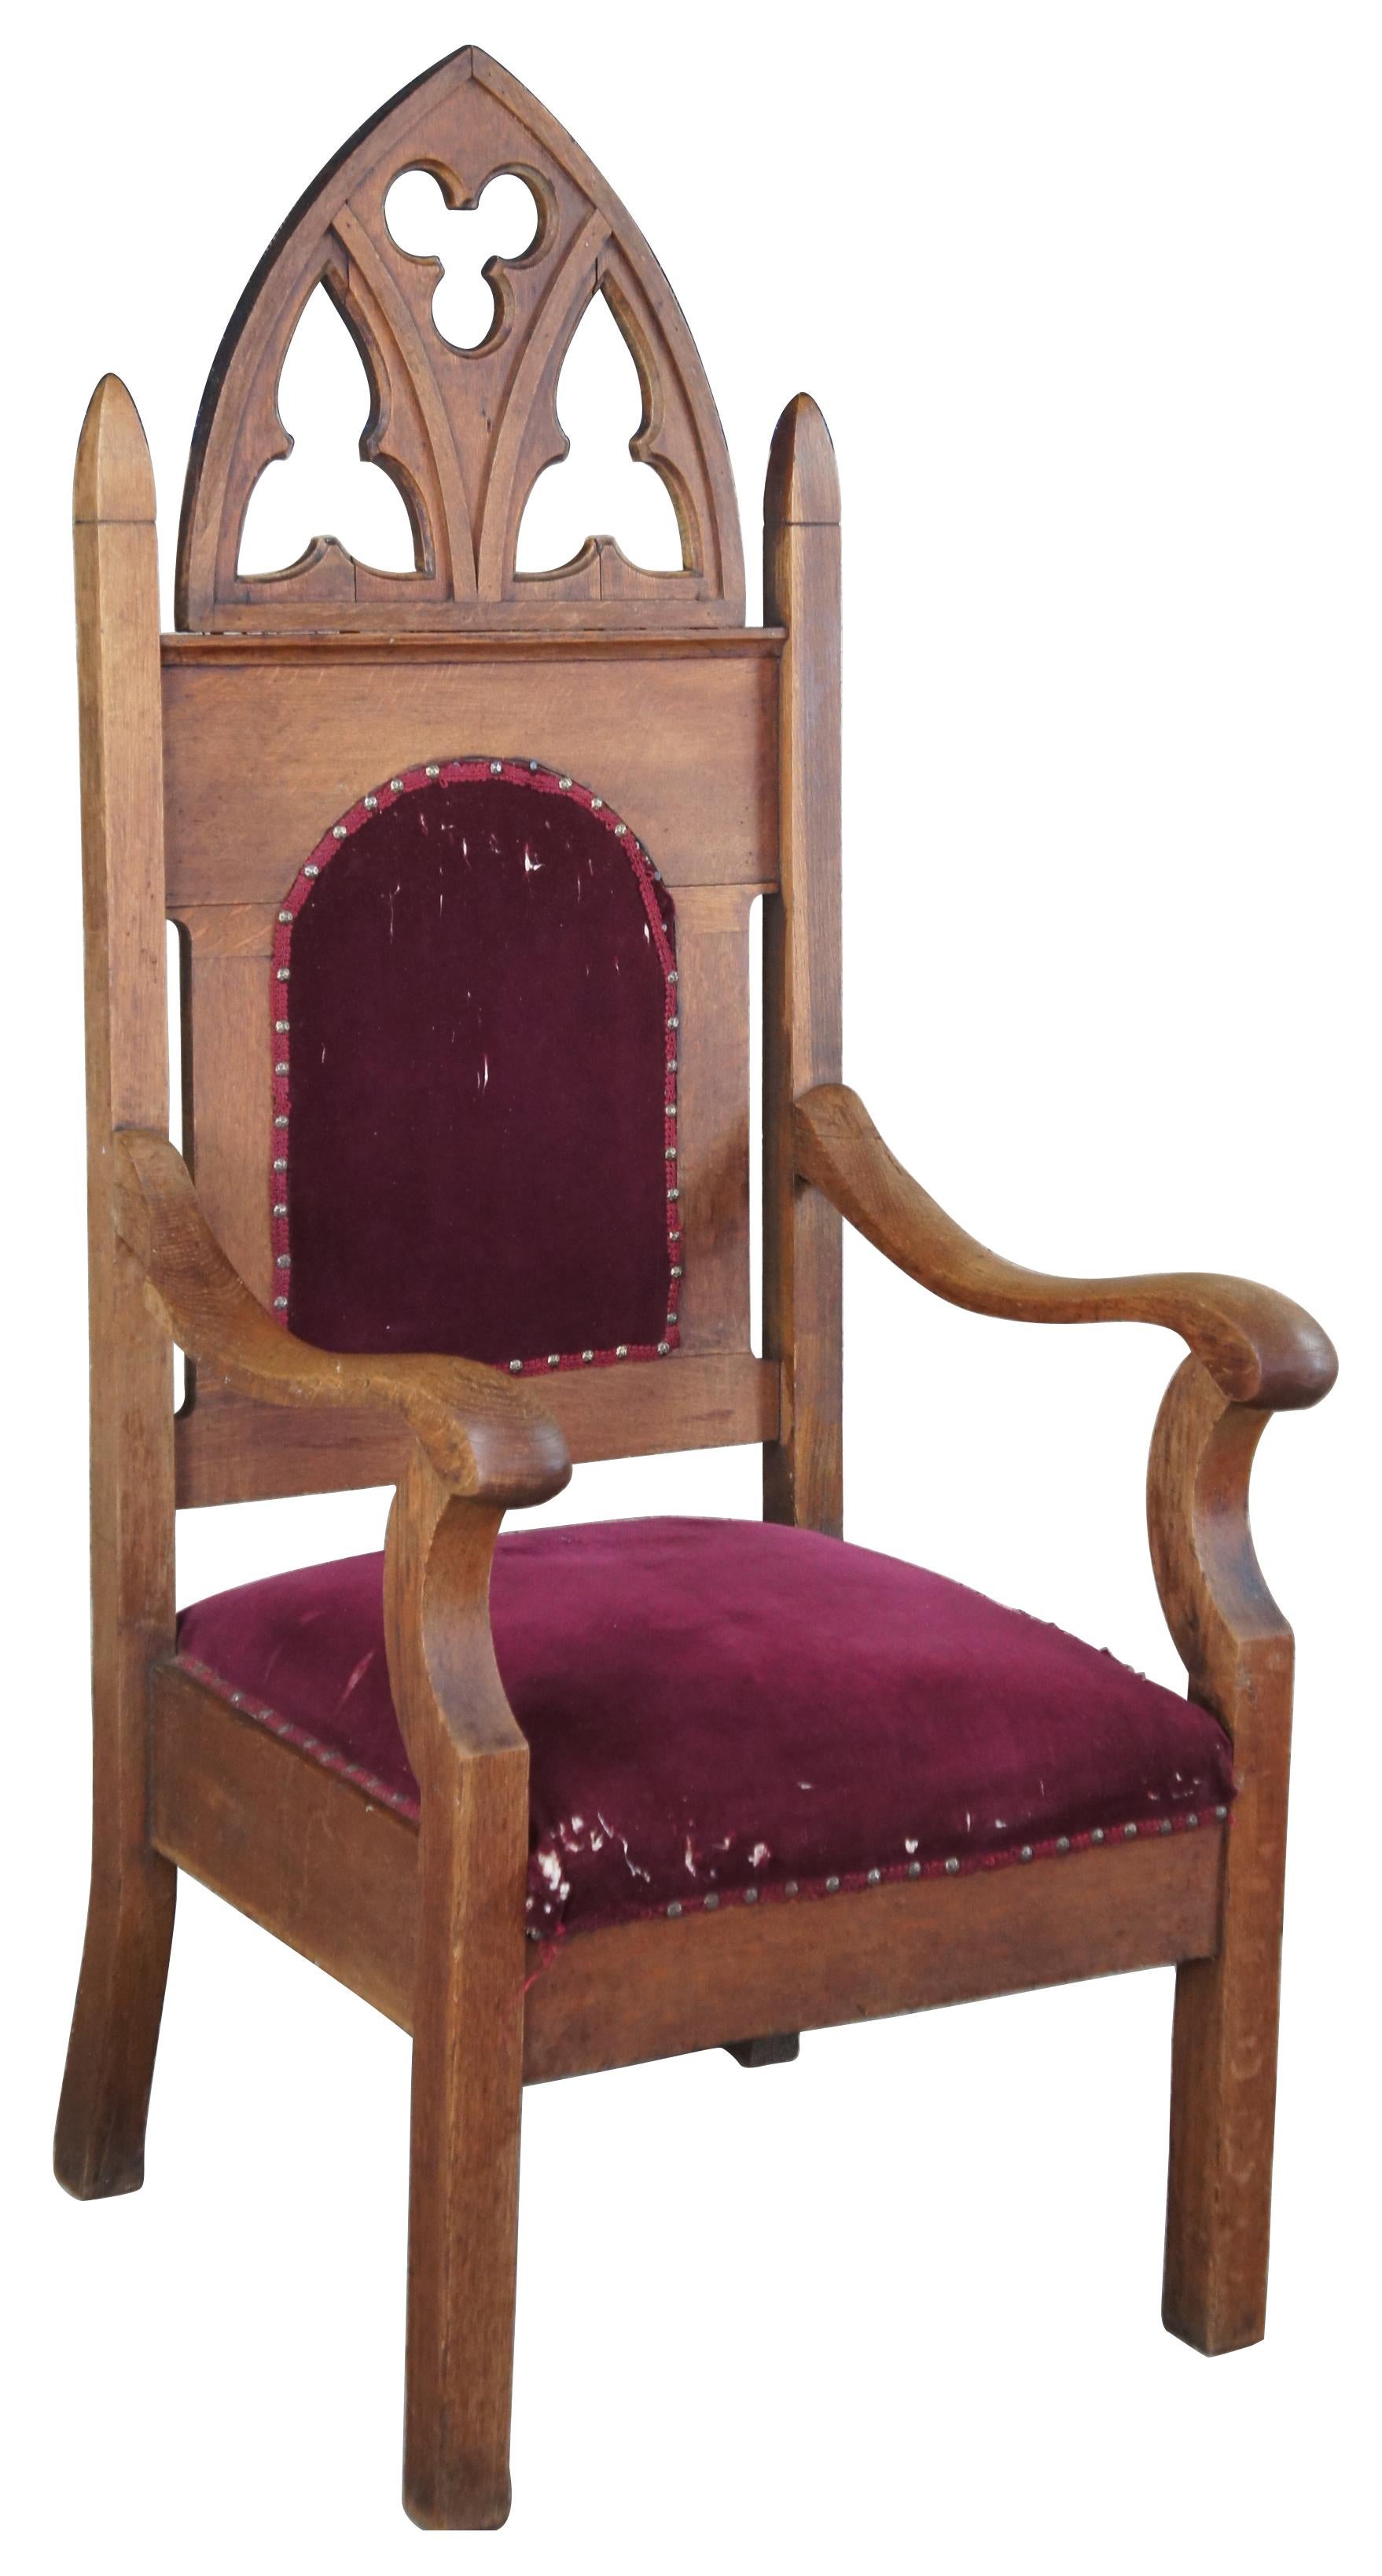 Antique Victorian Gothic Revival Bishops throne chair. Made of oak, featuring serpentine arms and arched back with carved details. Marked Three Pillars, No. 170. Measure: 59